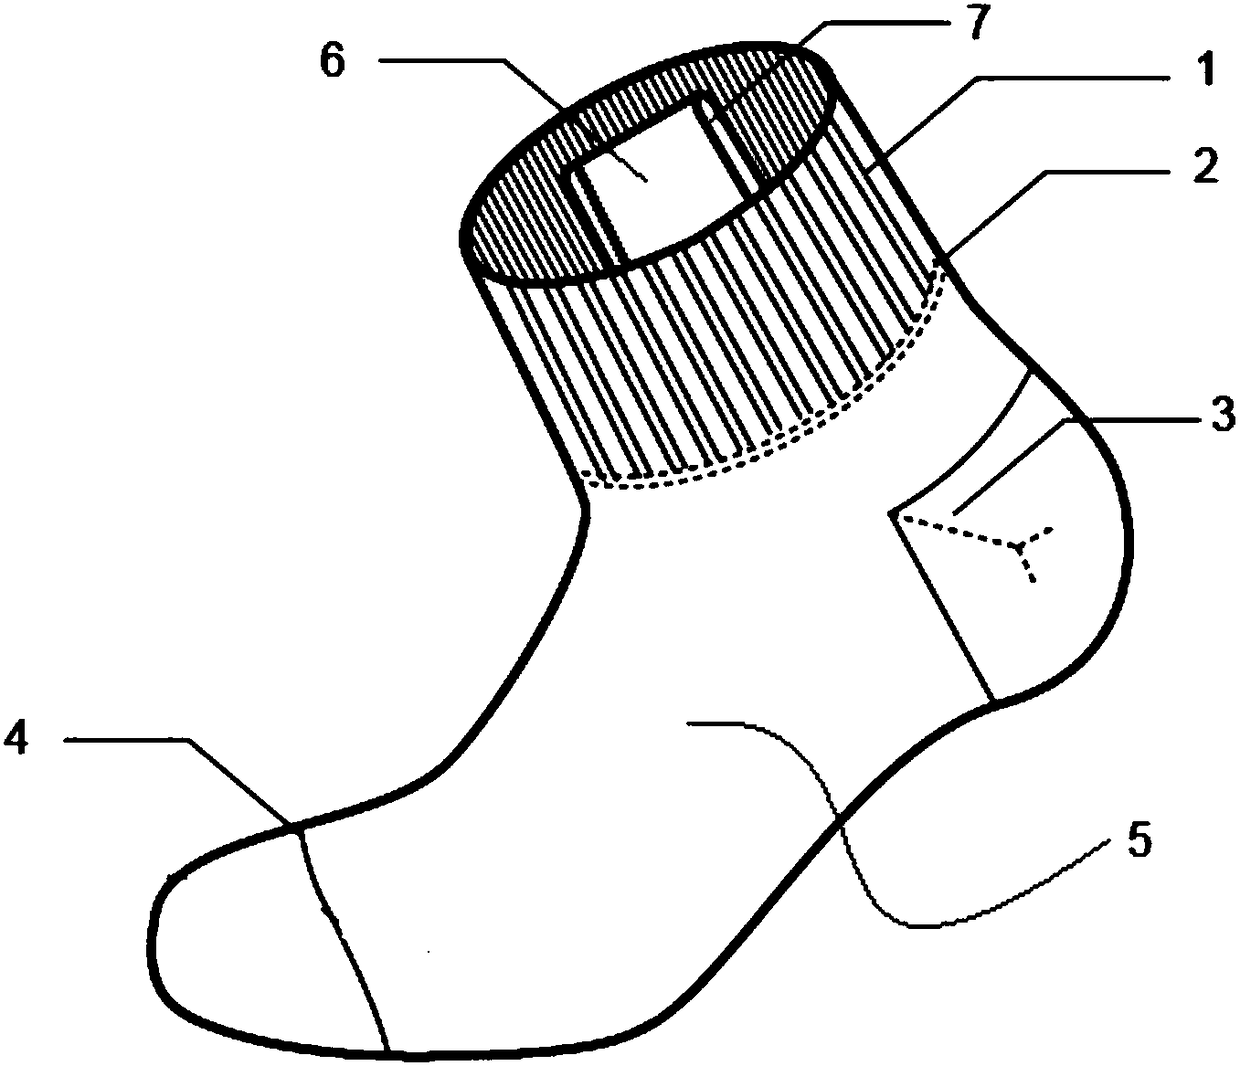 Sock with article placing function